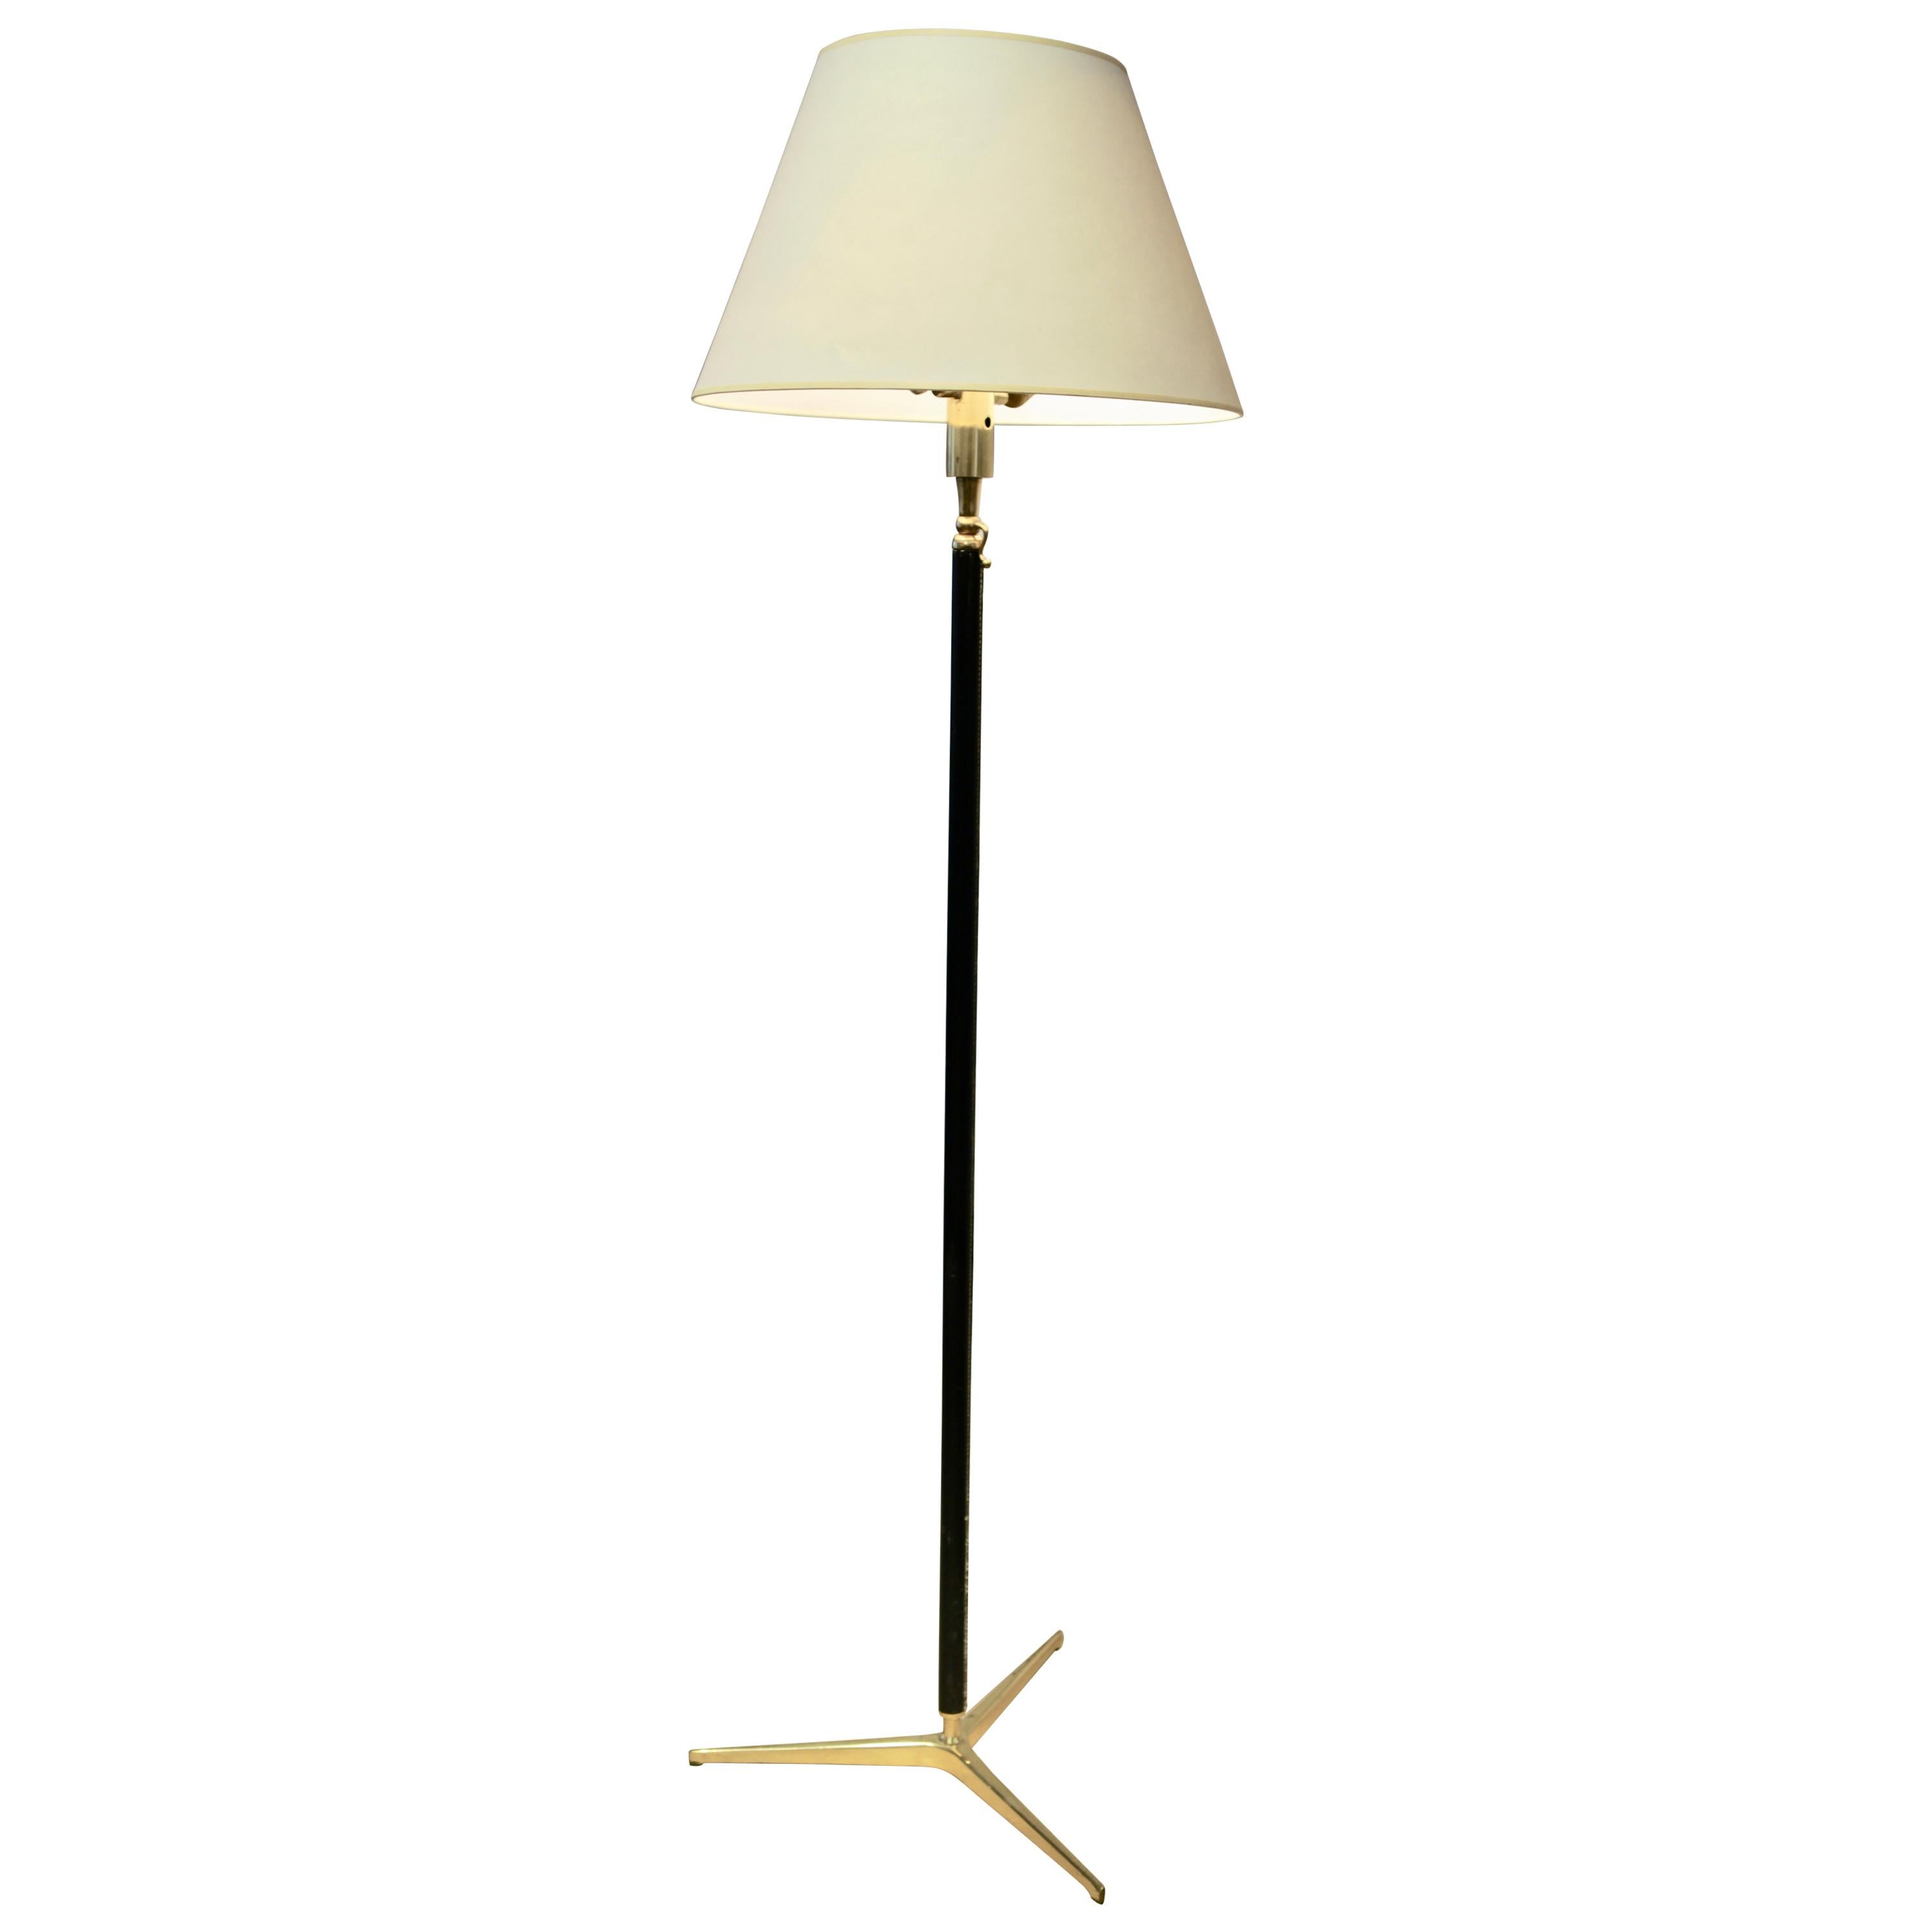 Gino Sarfatti, Attributed Floor Lamp, Model 1025, Brass and Leather